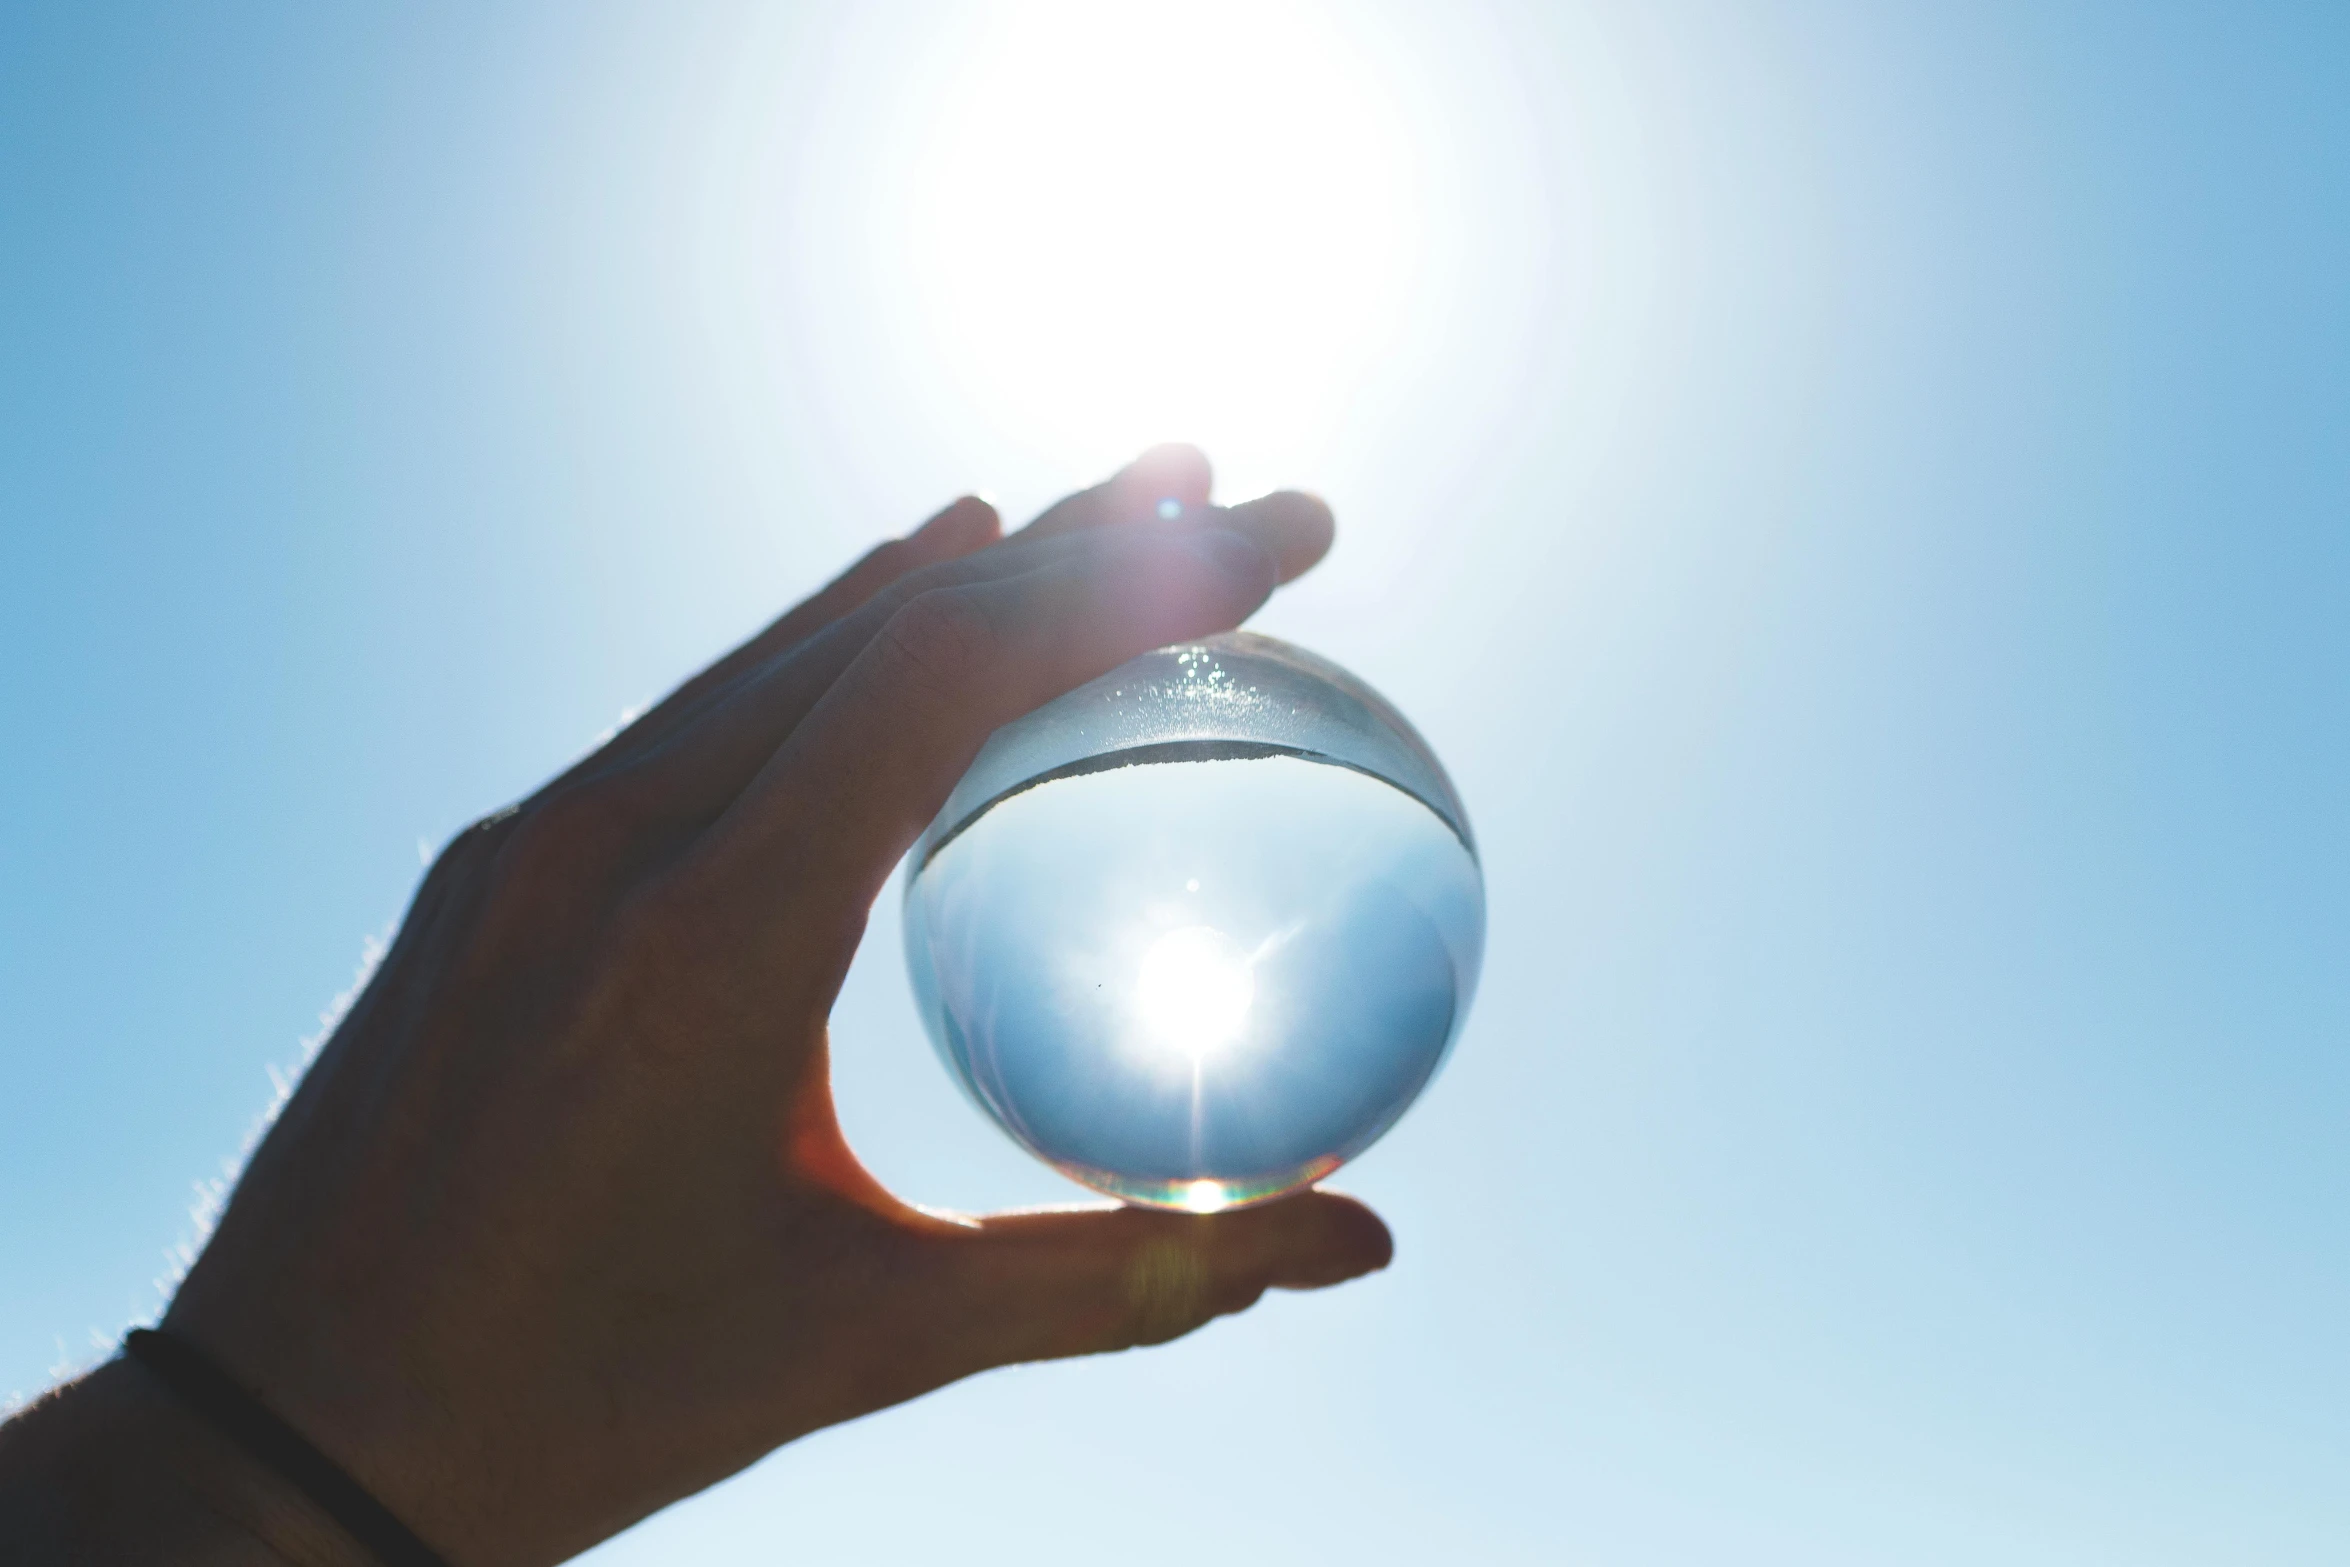 a person holding a glass ball in front of the sun, water element, clear blue skies, solarised, instagram post